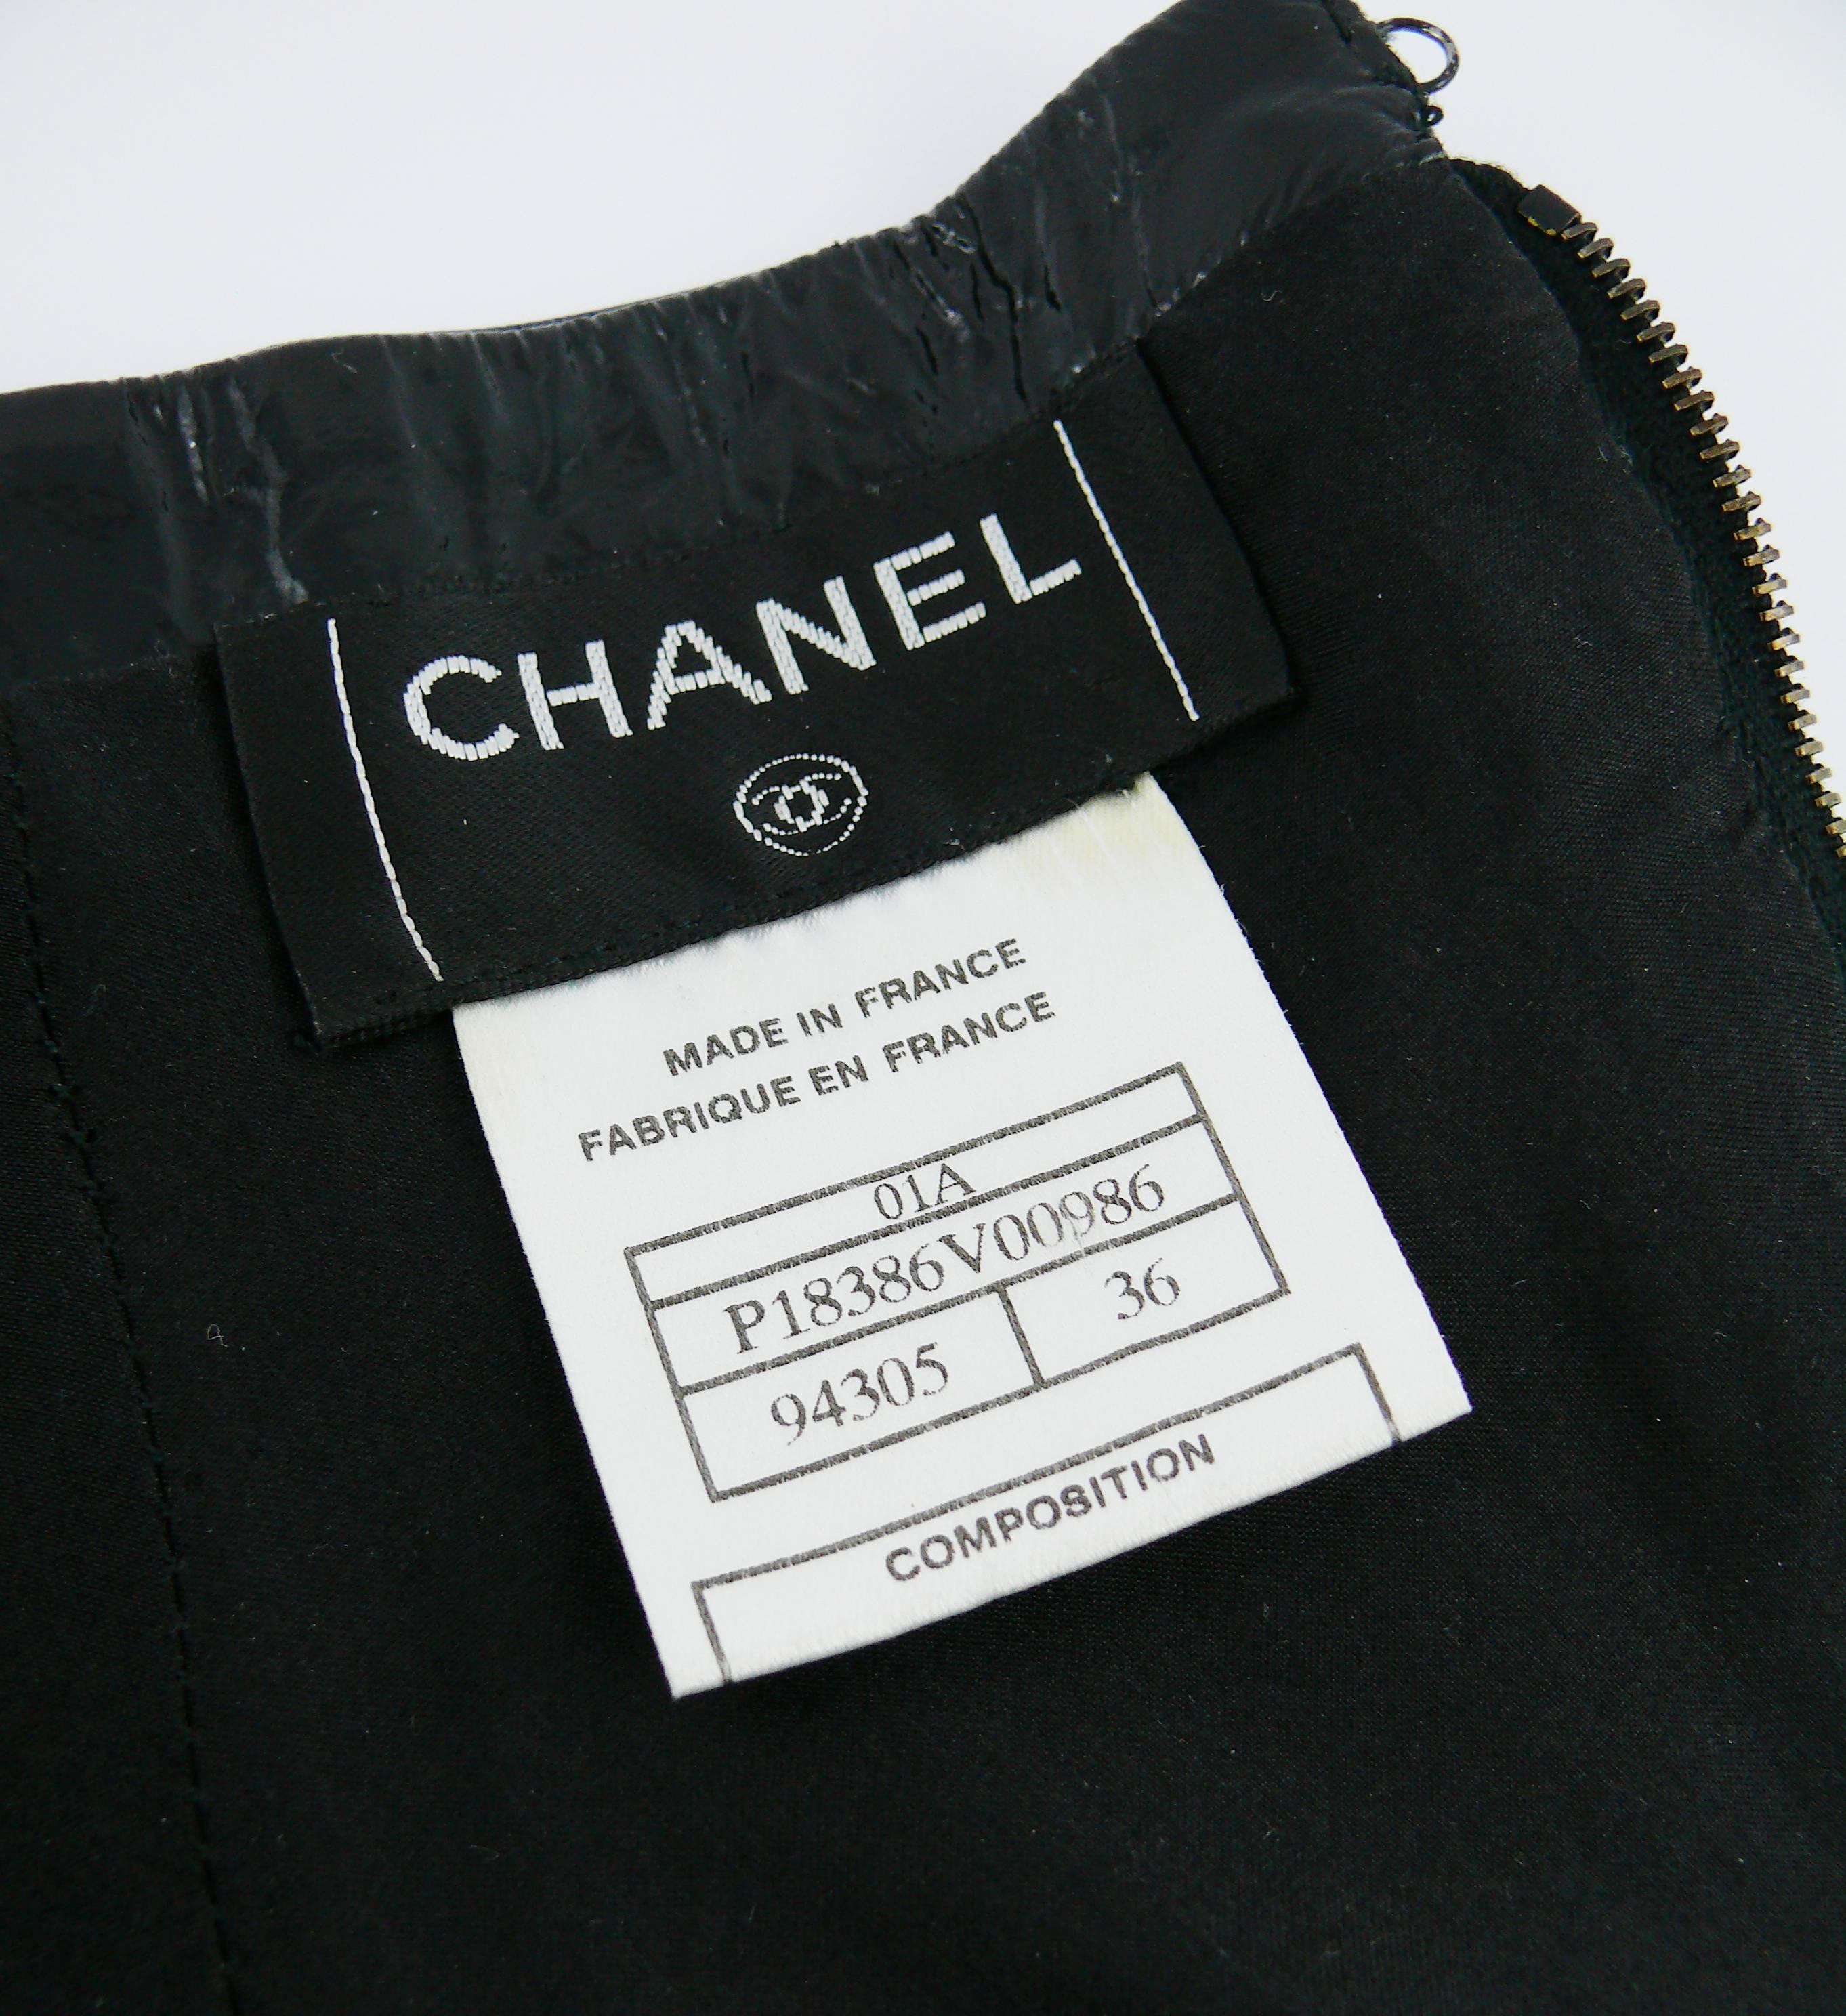 Chanel Black Patent Leather Corset Belt Fall/Winter 2001 Size 36 For Sale 2